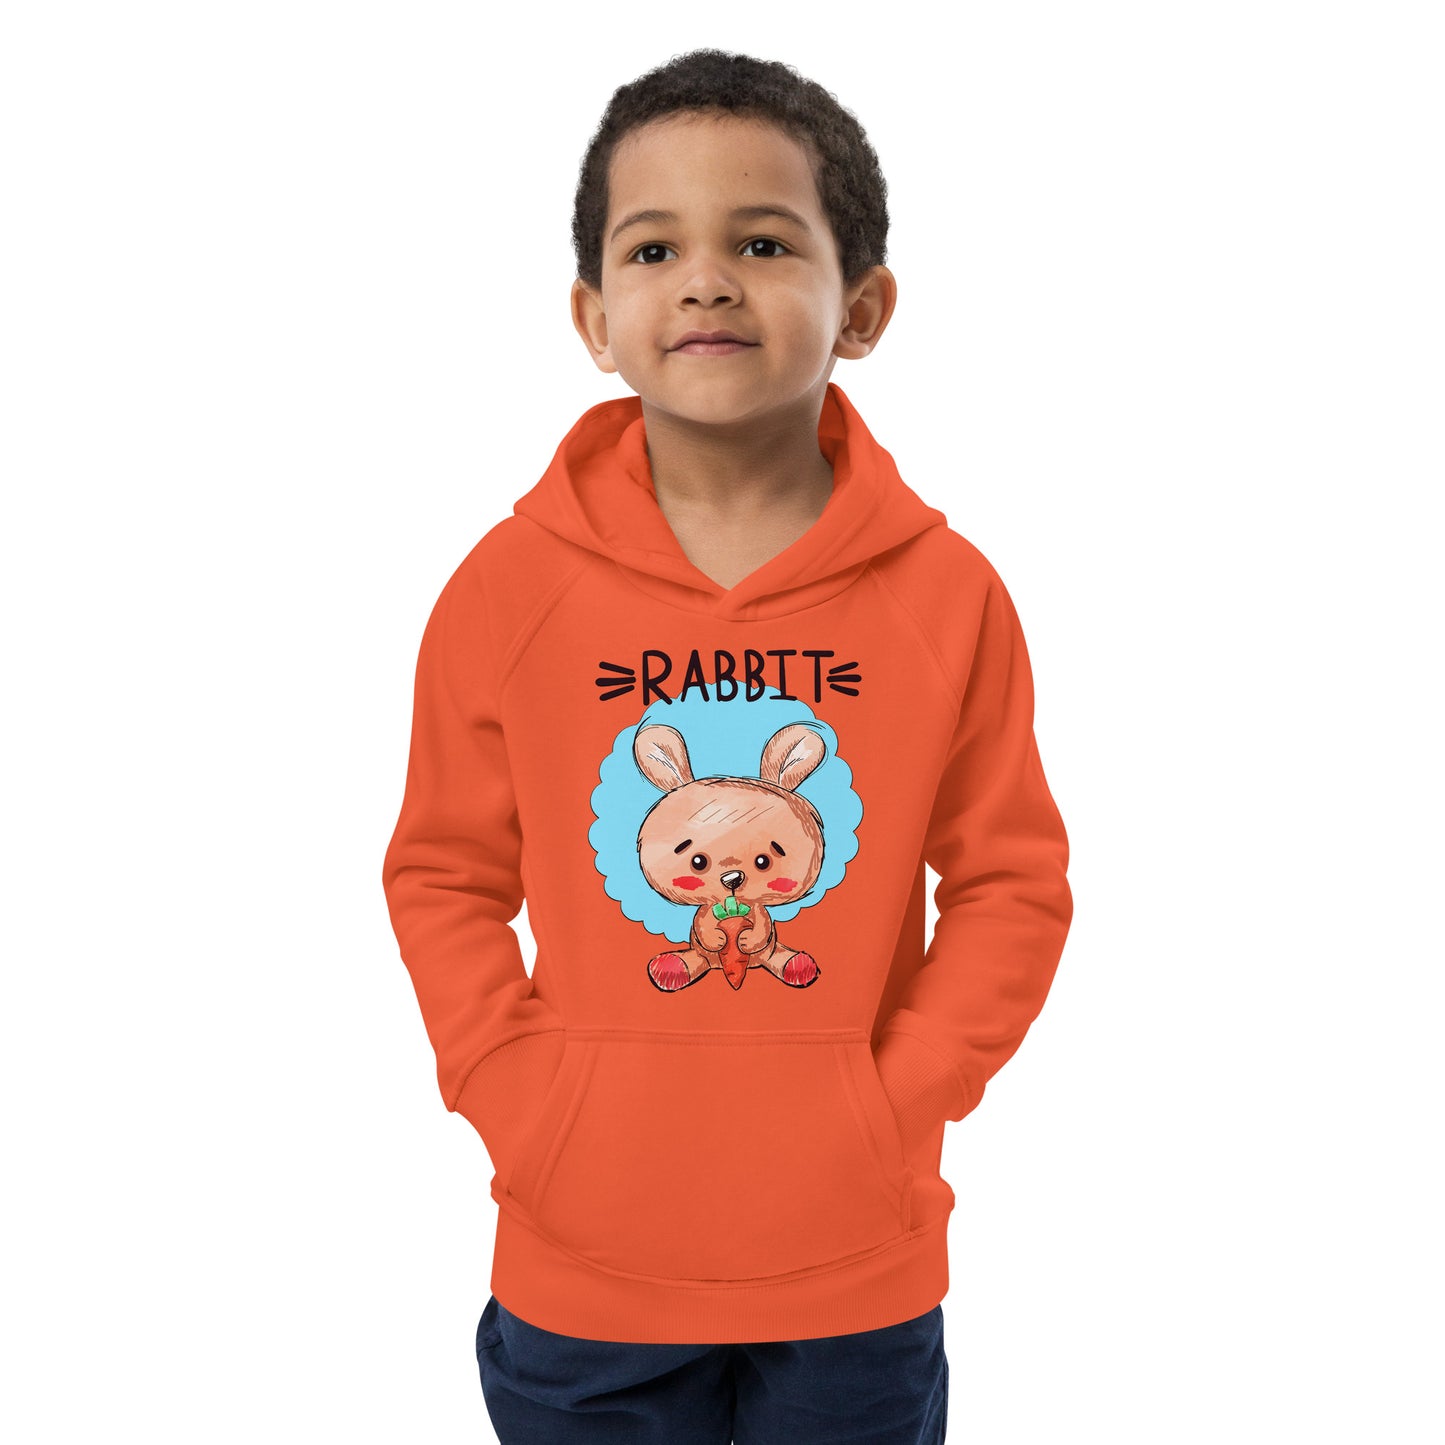 Rabbit with Carrot Hoodie, No. 0491